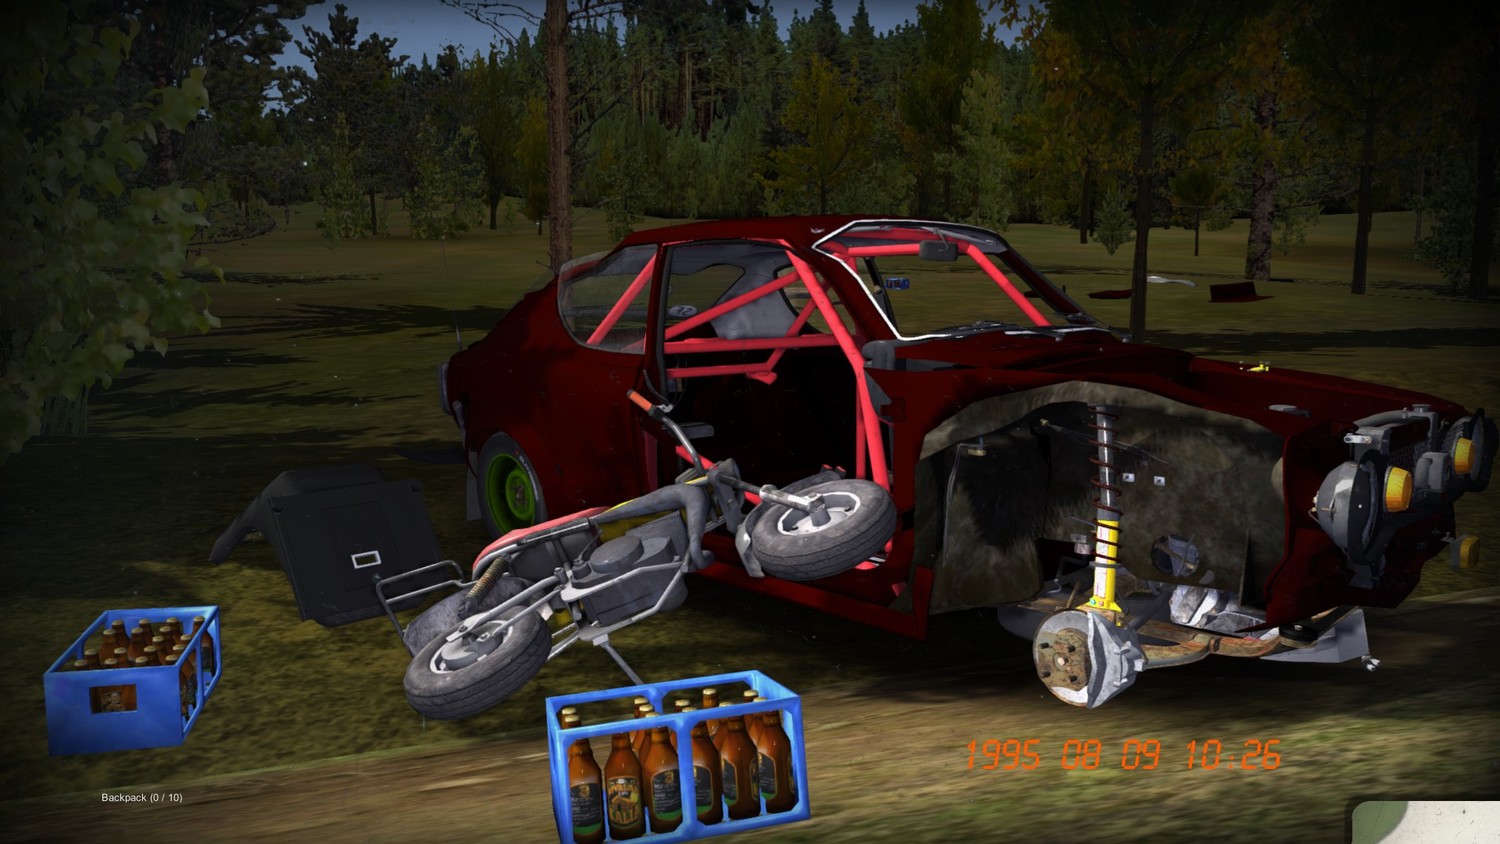 My Summer Car: SaveGame (Quest - Broken Satsuma during a chase)